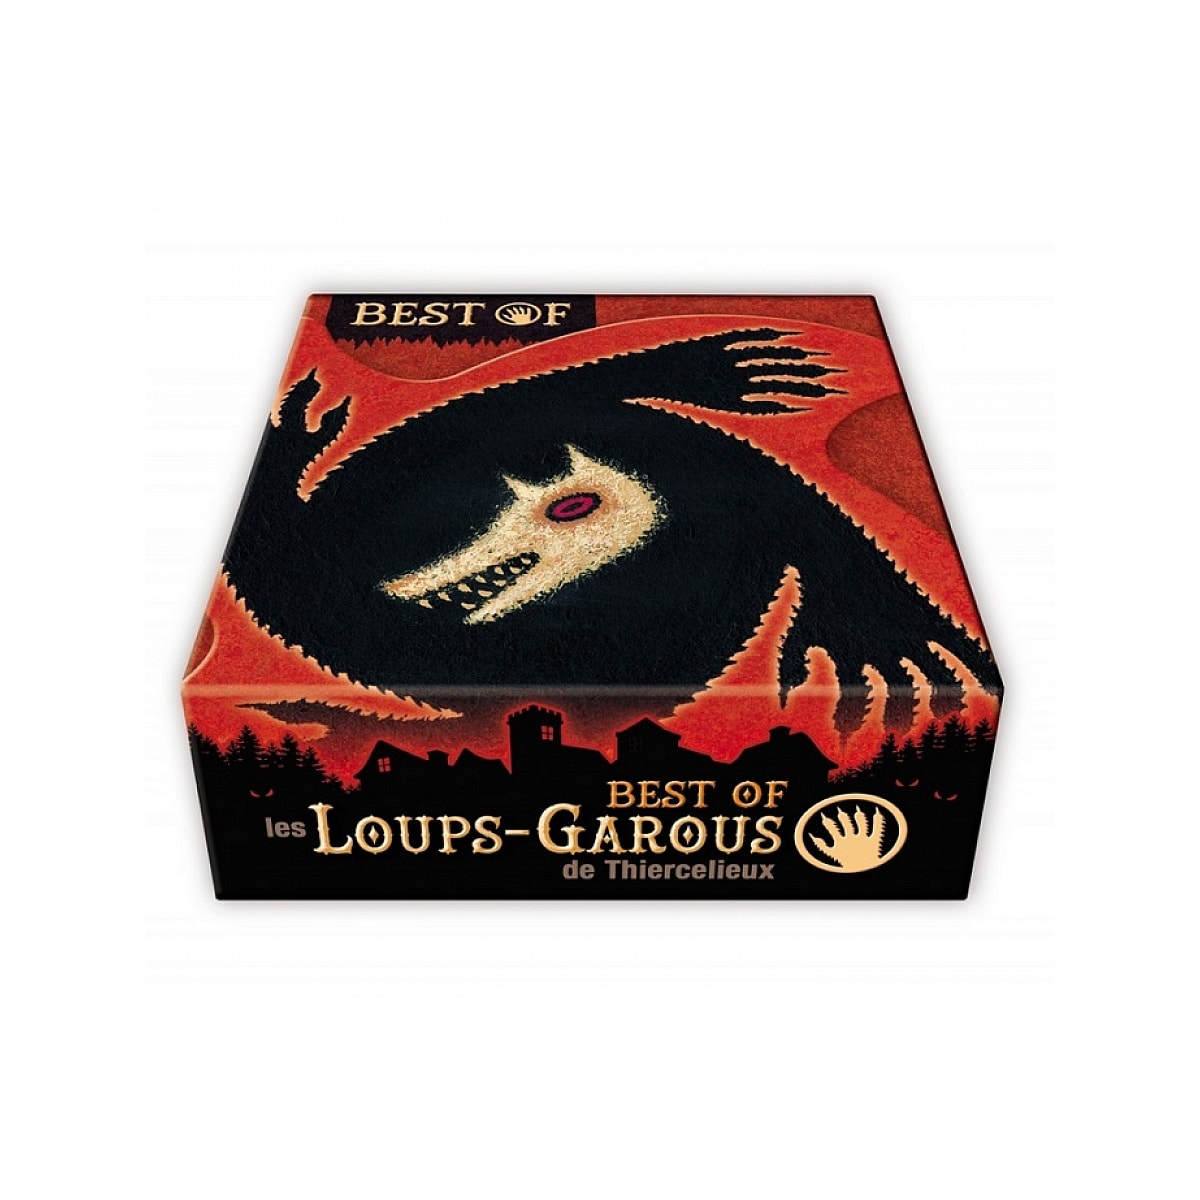 Loups garous editions best of